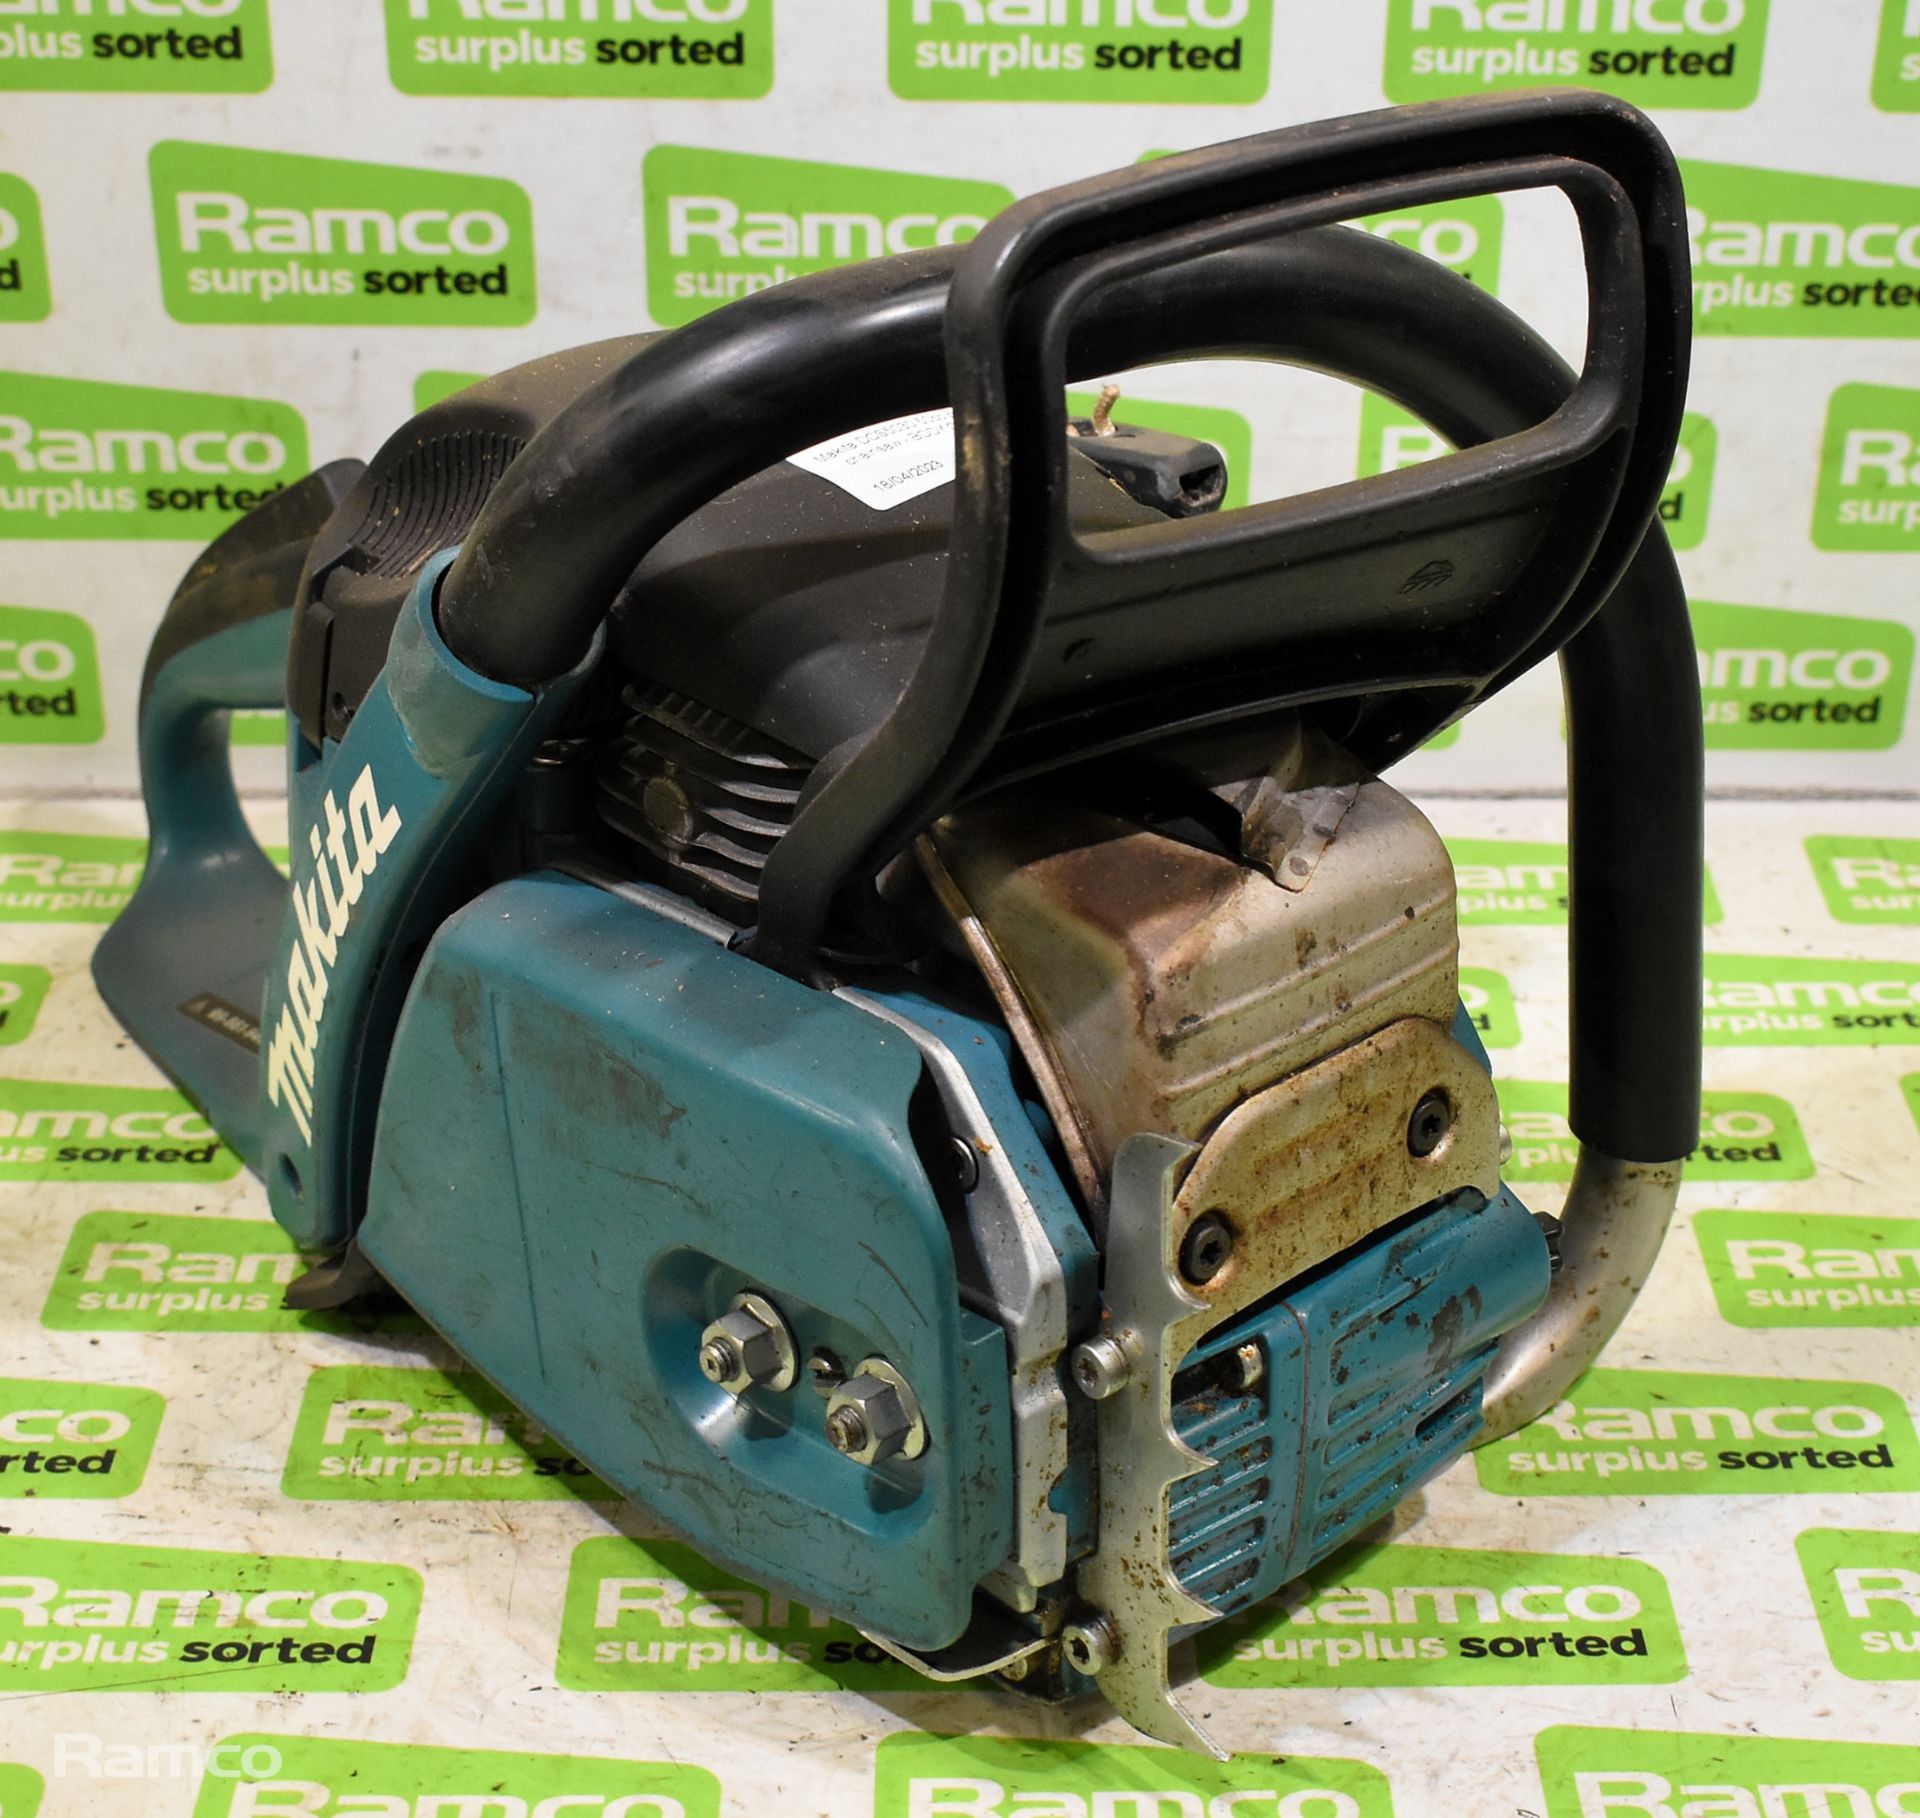 6x Makita DCS5030 50cc petrol chainsaw - BODIES ONLY - AS SPARES & REPAIRS - Image 15 of 33